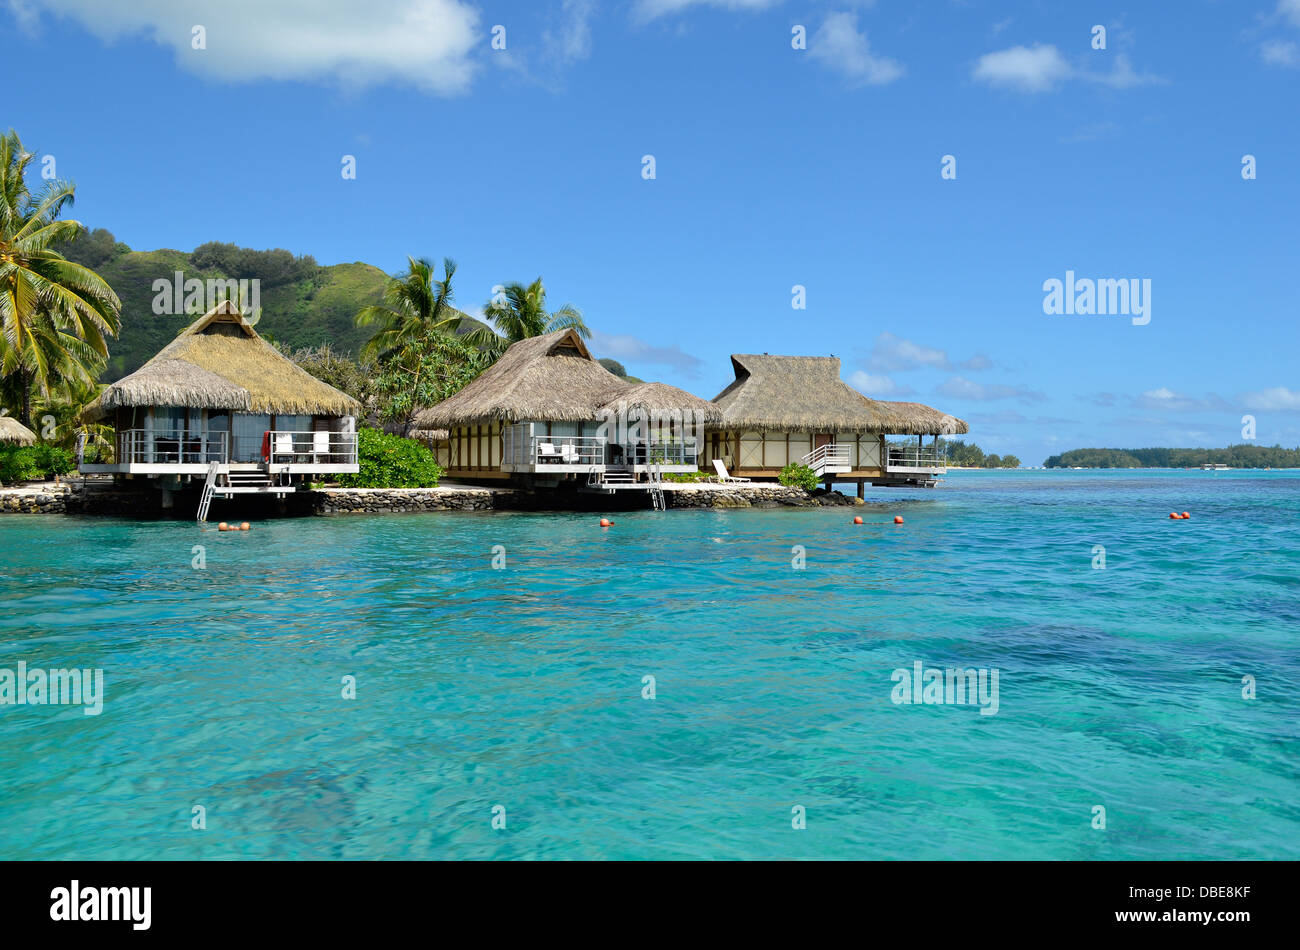 Luxury thatched roof honeymoon bungalows in a vacation resort in the clear blue lagoon of the tropical island of Moorea. Stock Photo